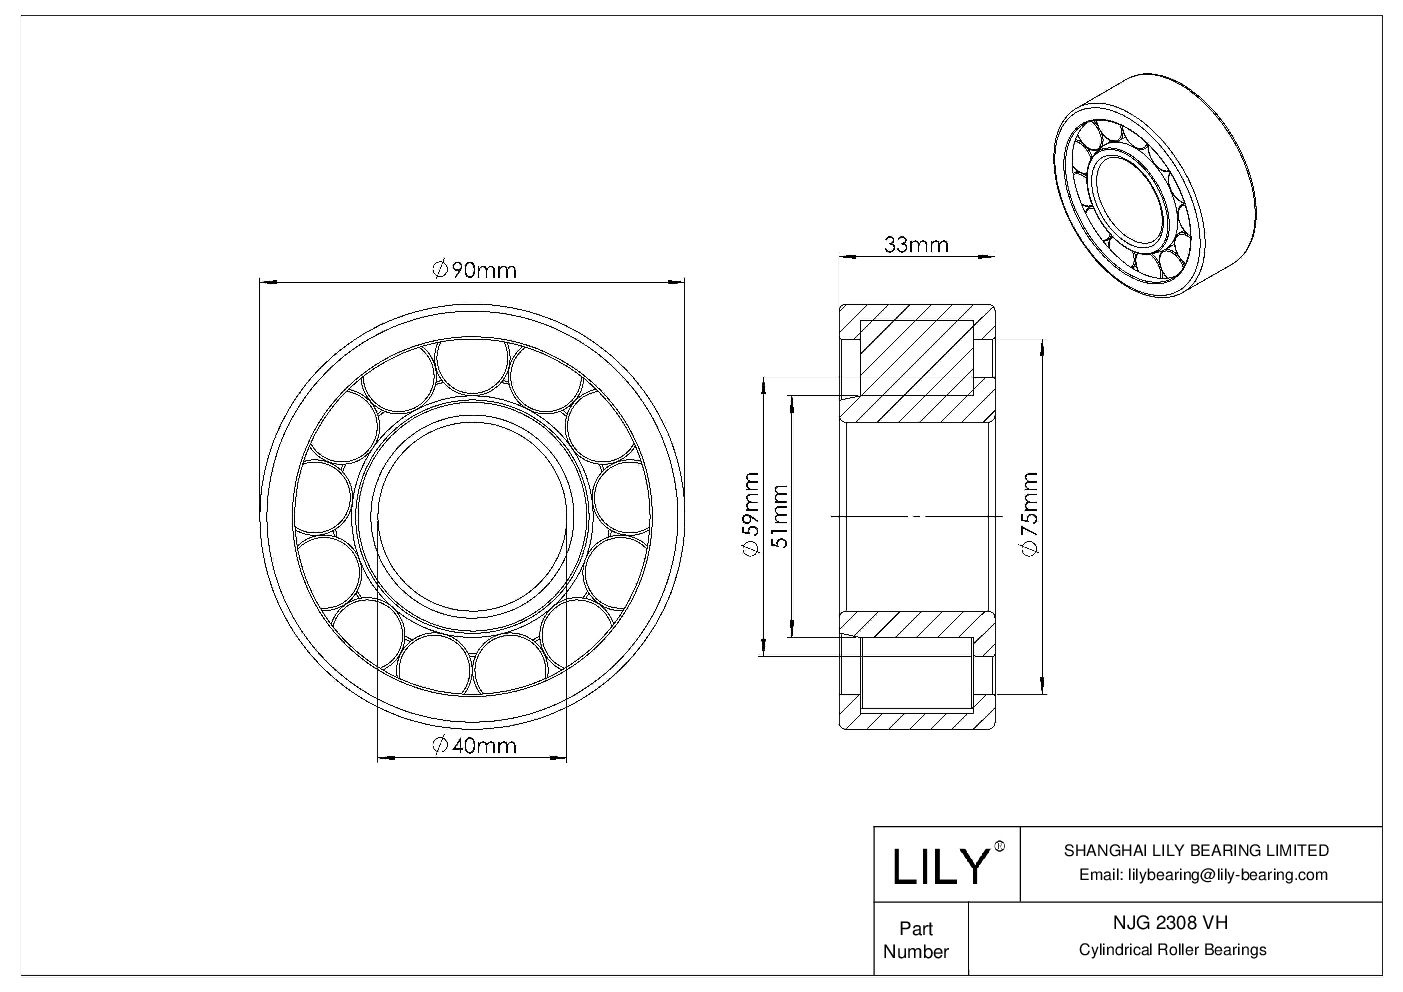 NJG 2308 VH Single Row Full Complement Cylindrical Roller Bearings cad drawing